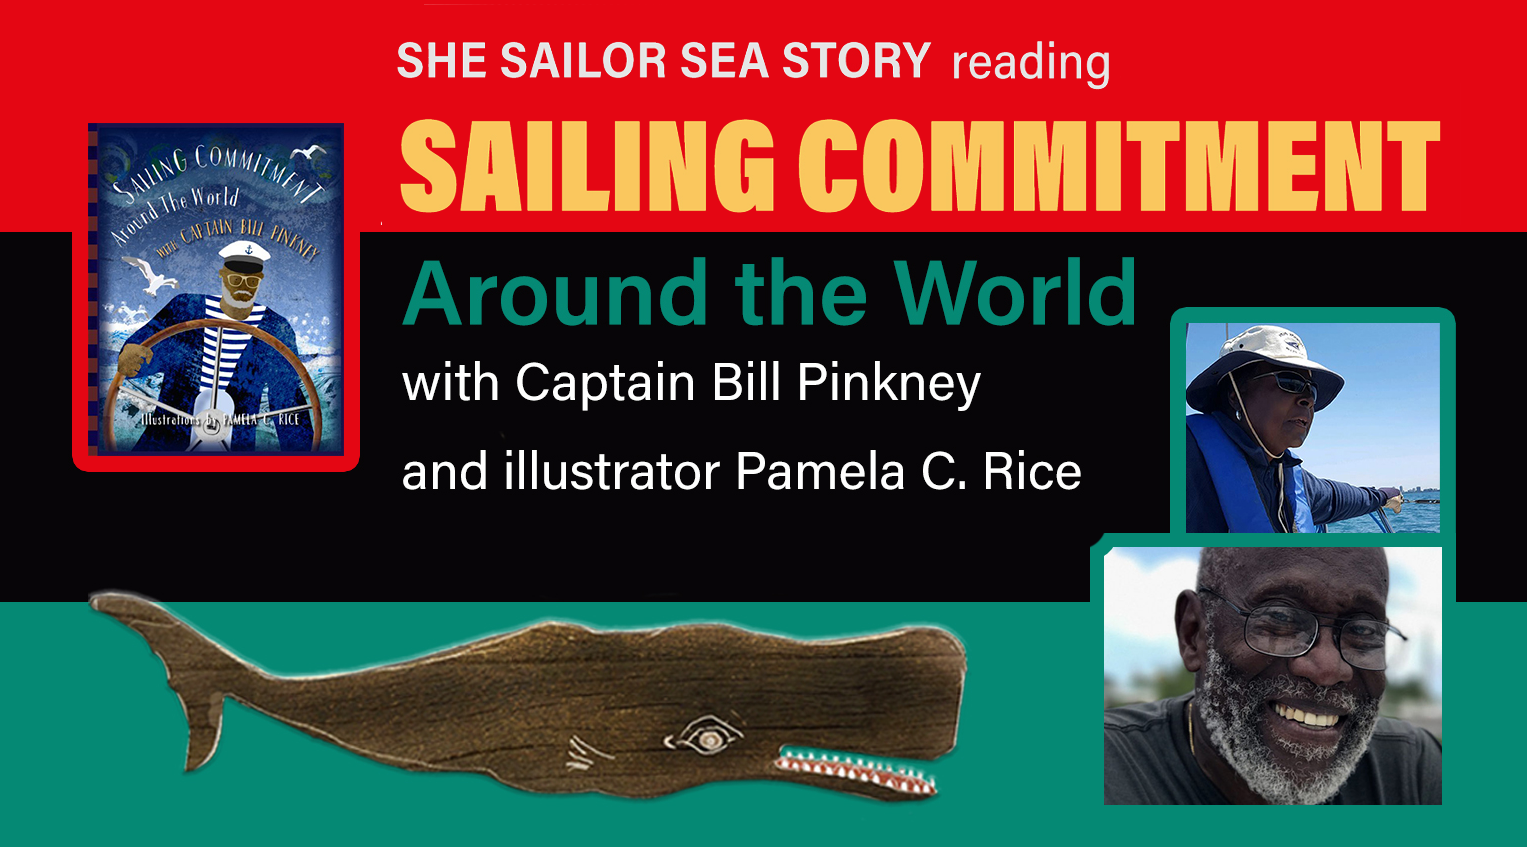 She Sailor Sea Story telling about the making of Sailing Committment, Around the World with Bill Pinkney. The children's book is beautifully illustrated by Pam Rice.